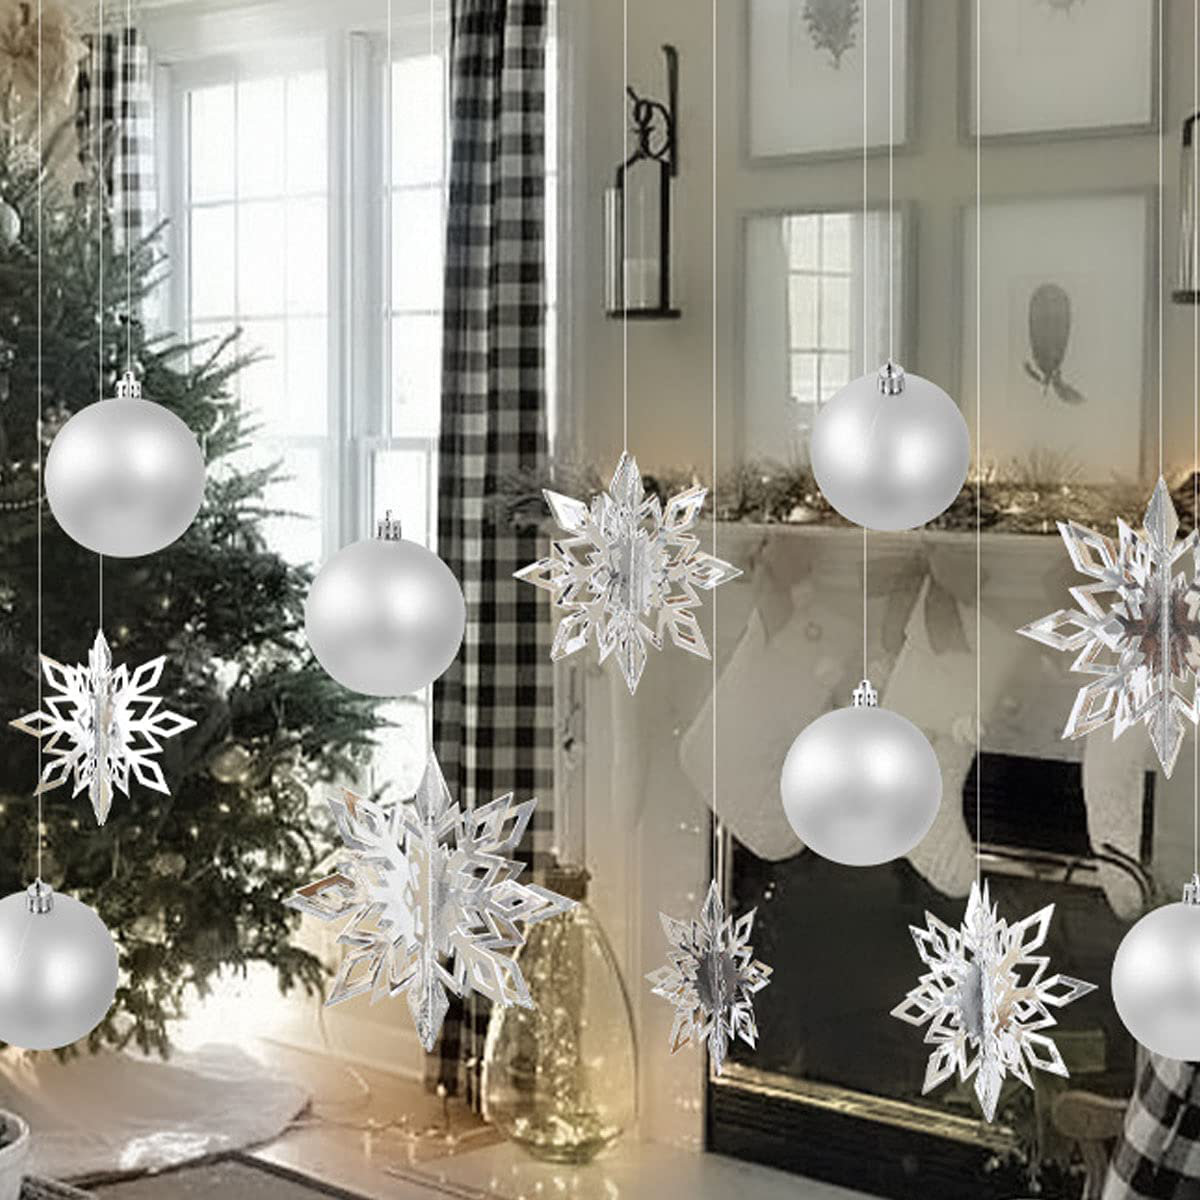 Whaline 40 Pcs Silver Glitter Snowflake Hanging Ornaments with 197 Inches Silver Rope Christmas Tree Decorations Xmas Window Door Accessories